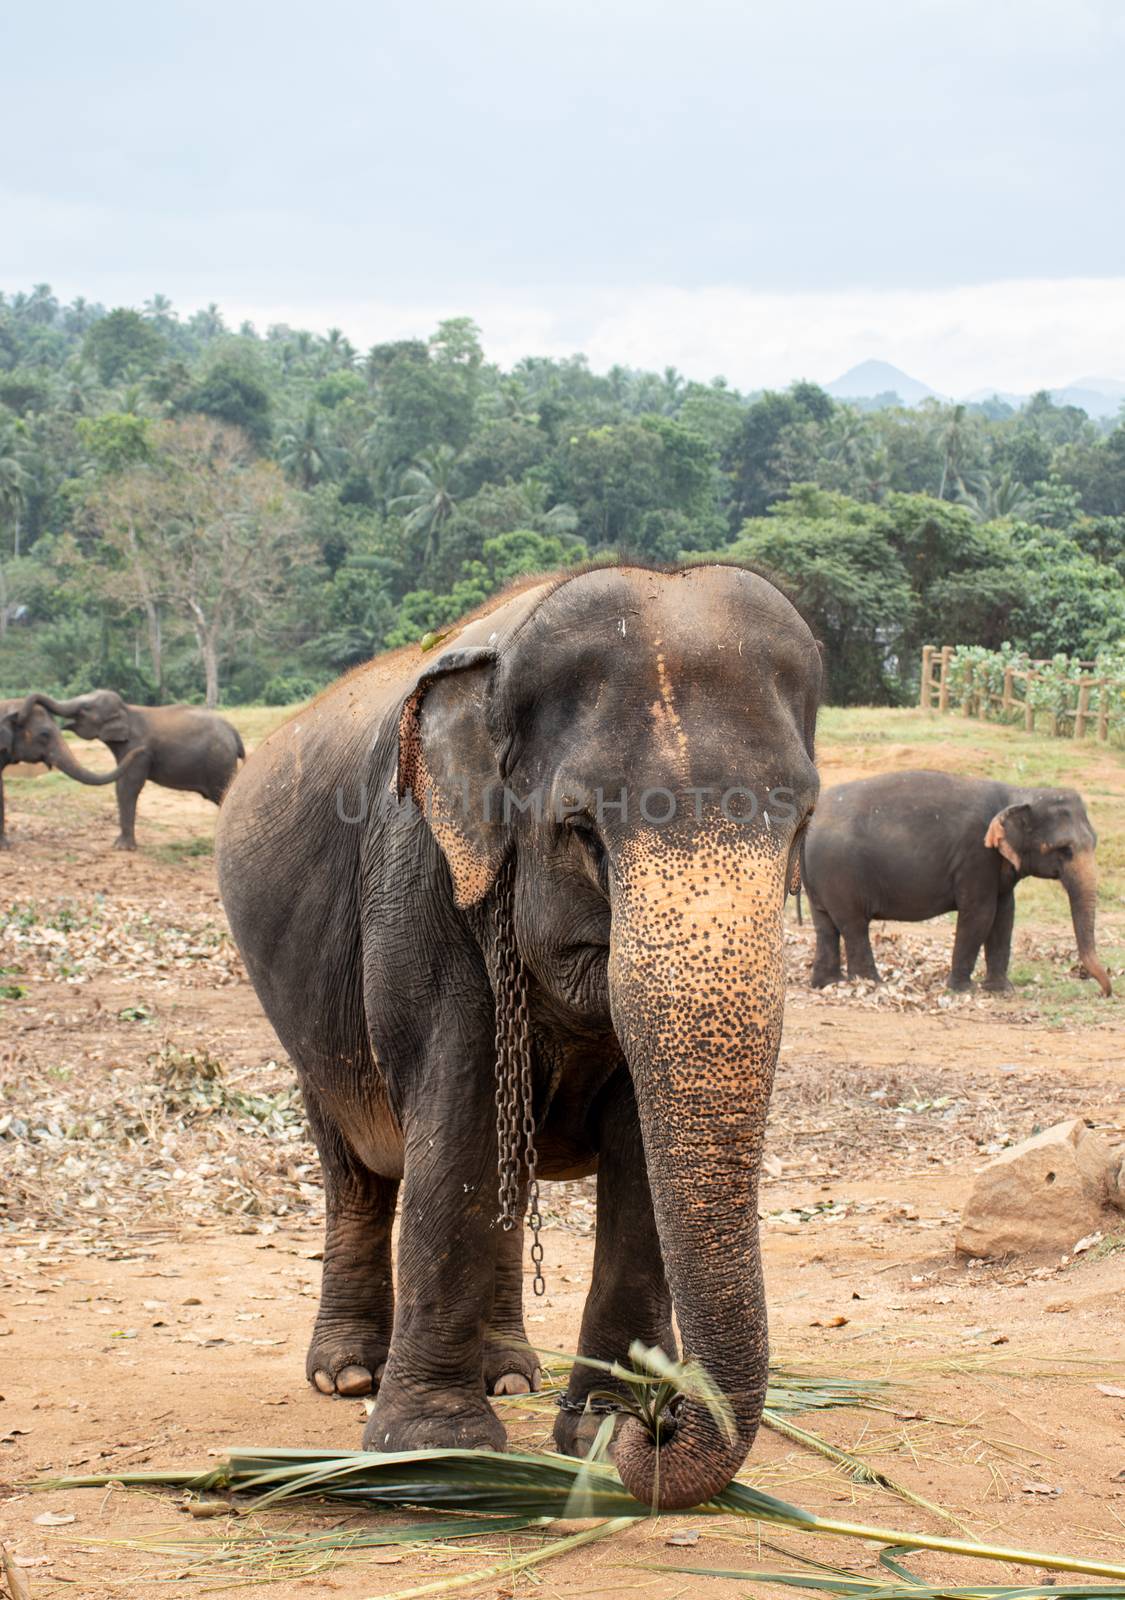 Pinnawala Elephant Orphanage is an nursery and captive breeding ground for wild asian elephants and has the largest herd of captive elephants in the world